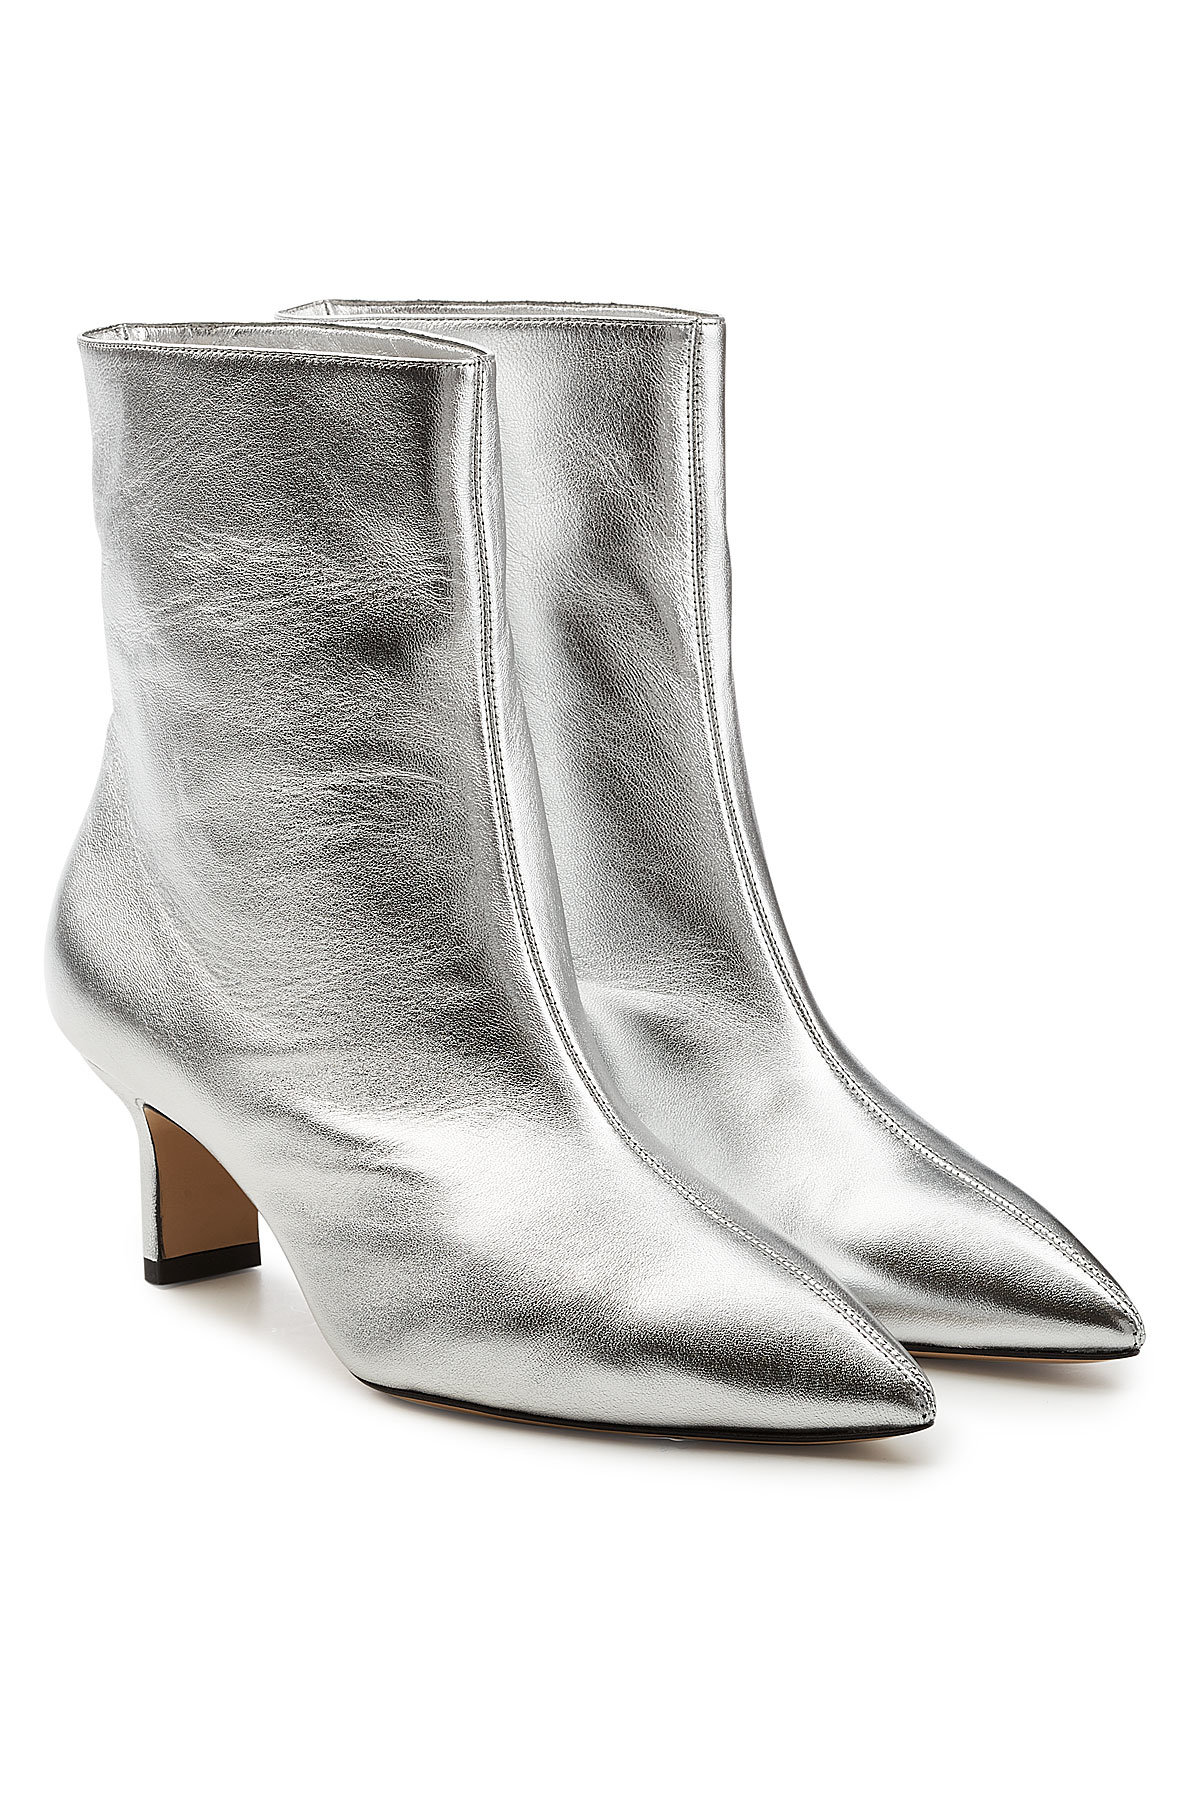 Paul Andrew - Mangold Metallic Leather Ankle Boots